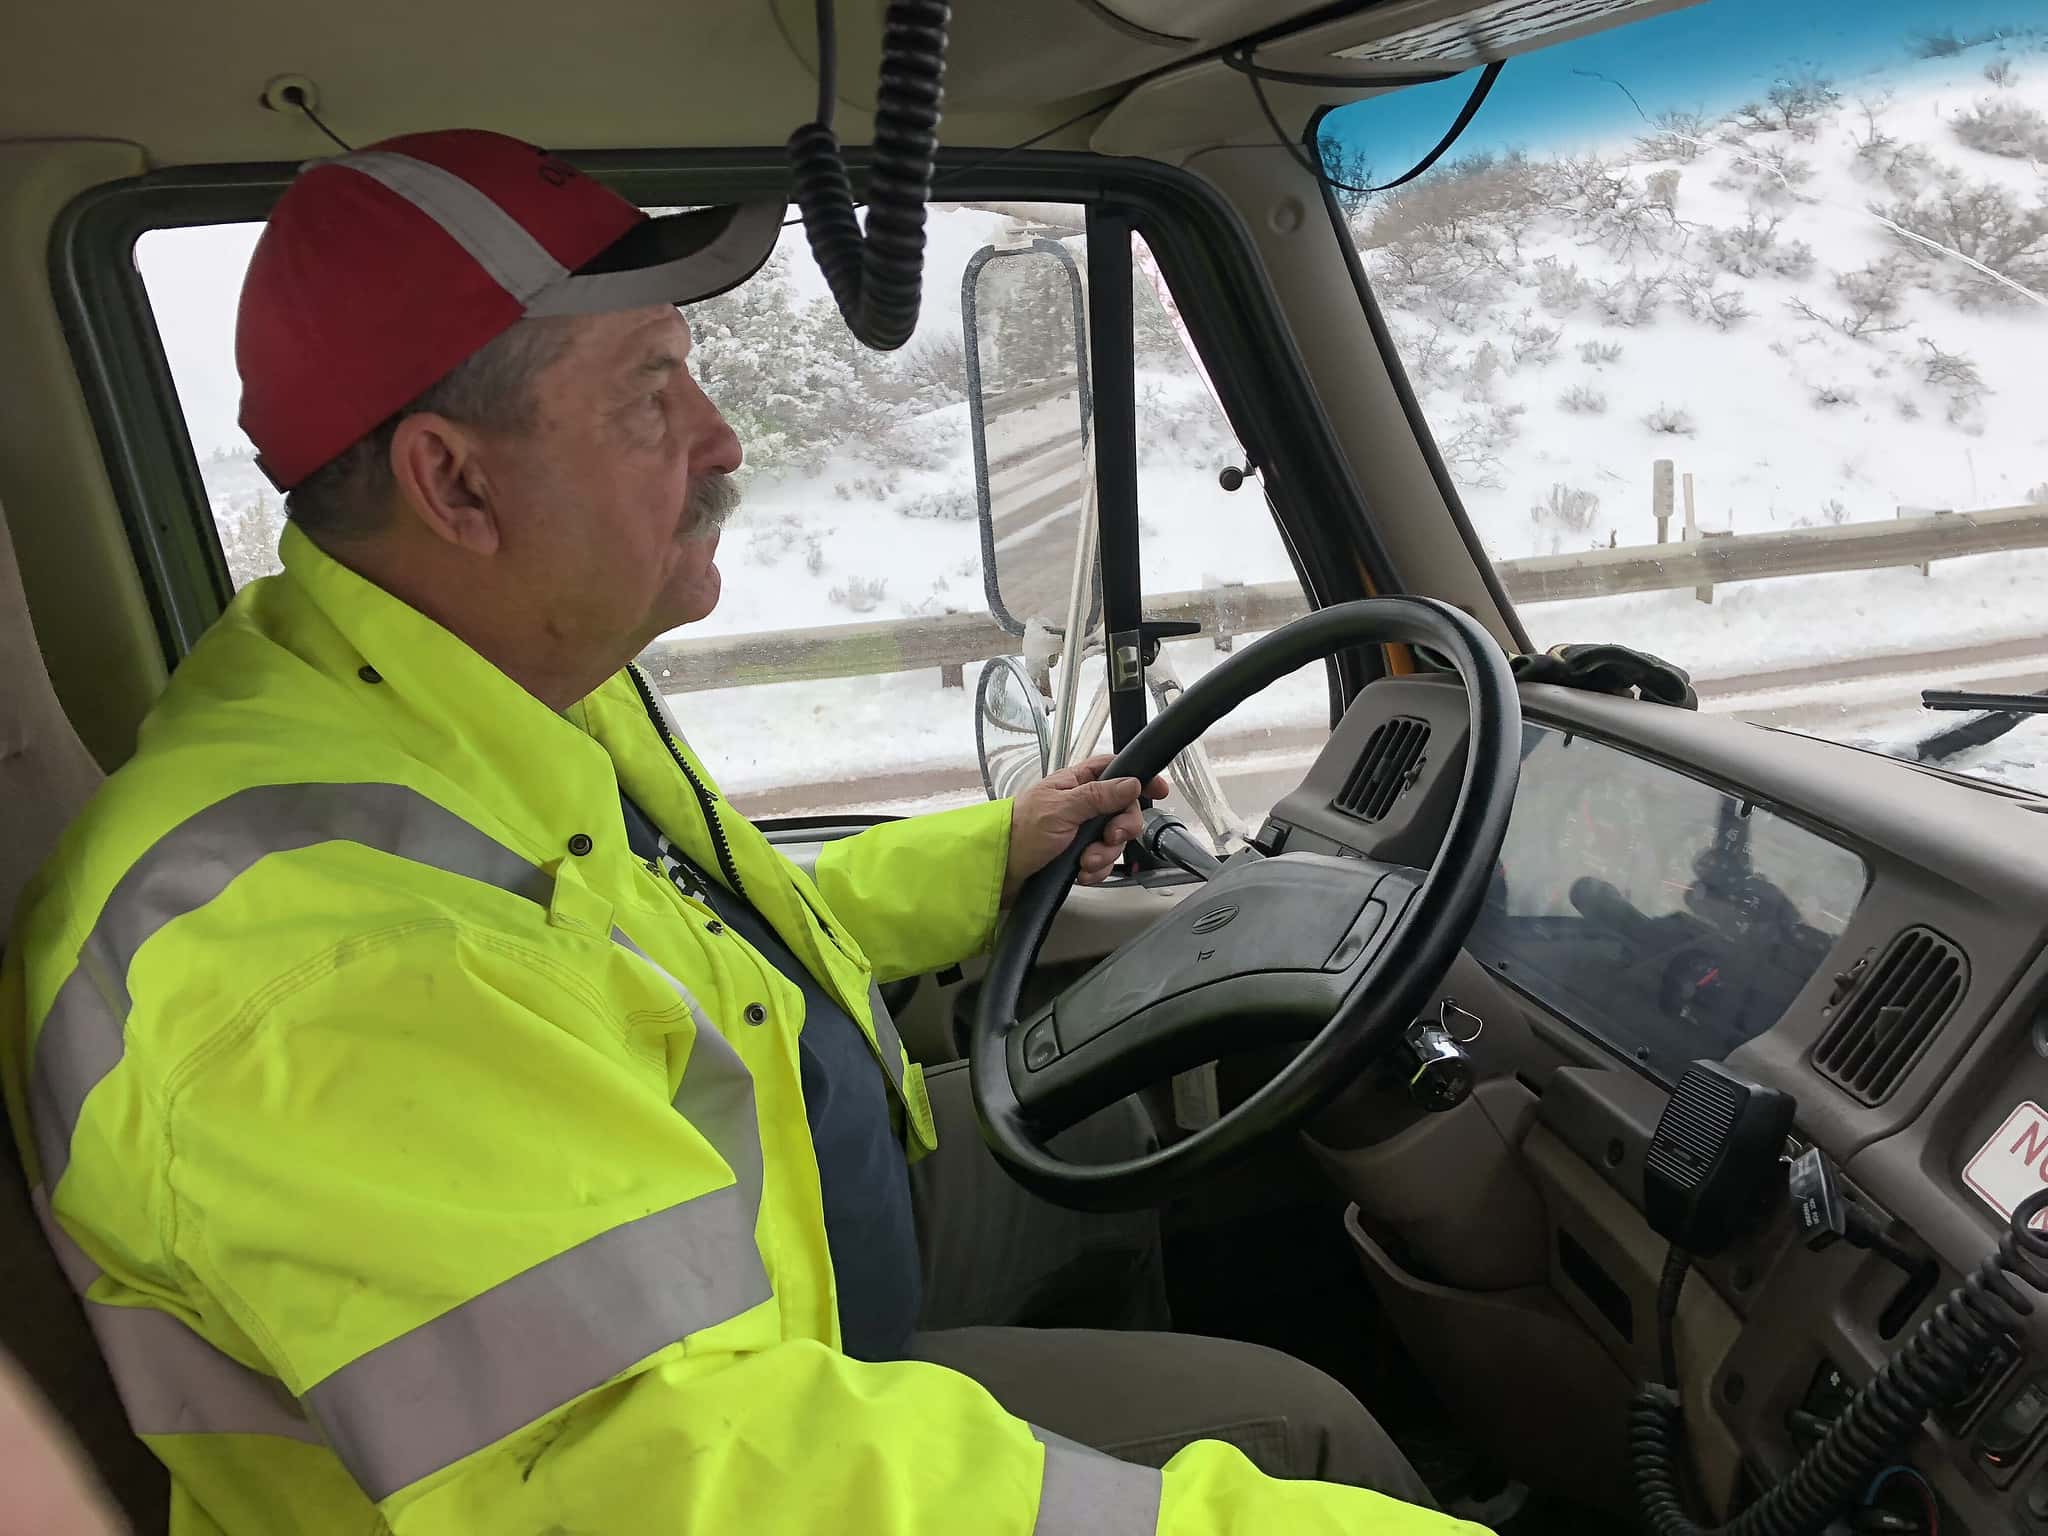 <p><strong>Location: </strong>Arctic regions, like Alaska or Northern Canada</p><p>Arctic Truck drivers cross treacherous ice roads to deliver supplies to remote areas. Considering they’re traveling to remote destinations, there is often minimal human contact along the way.</p><p><strong>Salary:</strong> $20,000 to $75,000 per season</p>